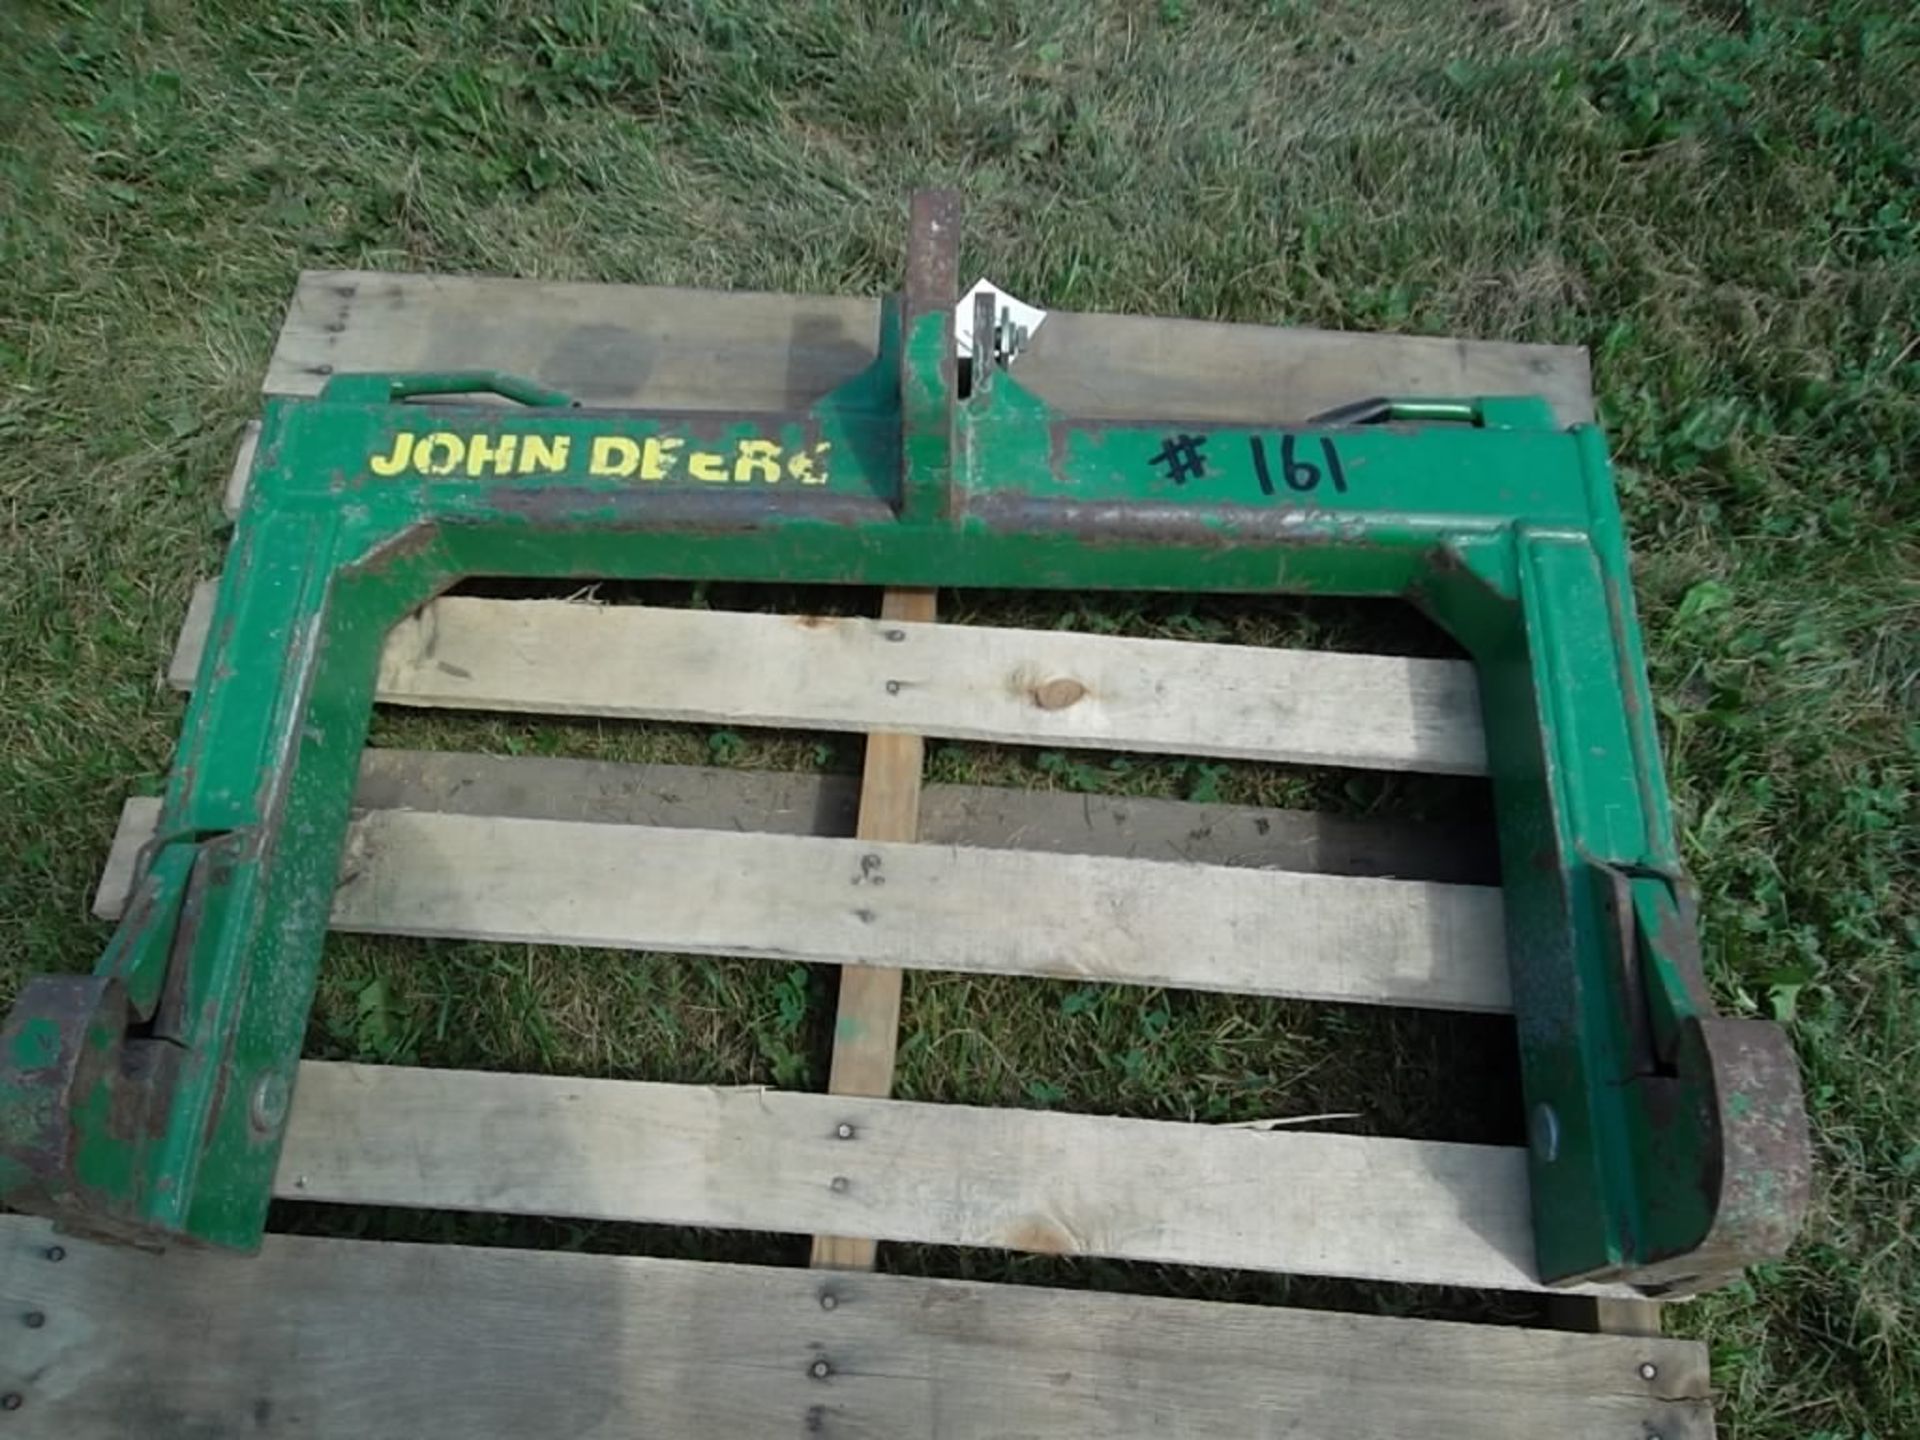 Lot 161 1 JOHN DEERE ALL WELDED  STEEL CAT 3 QUICK HITCH( There is a 6% Sales Tax on this item)